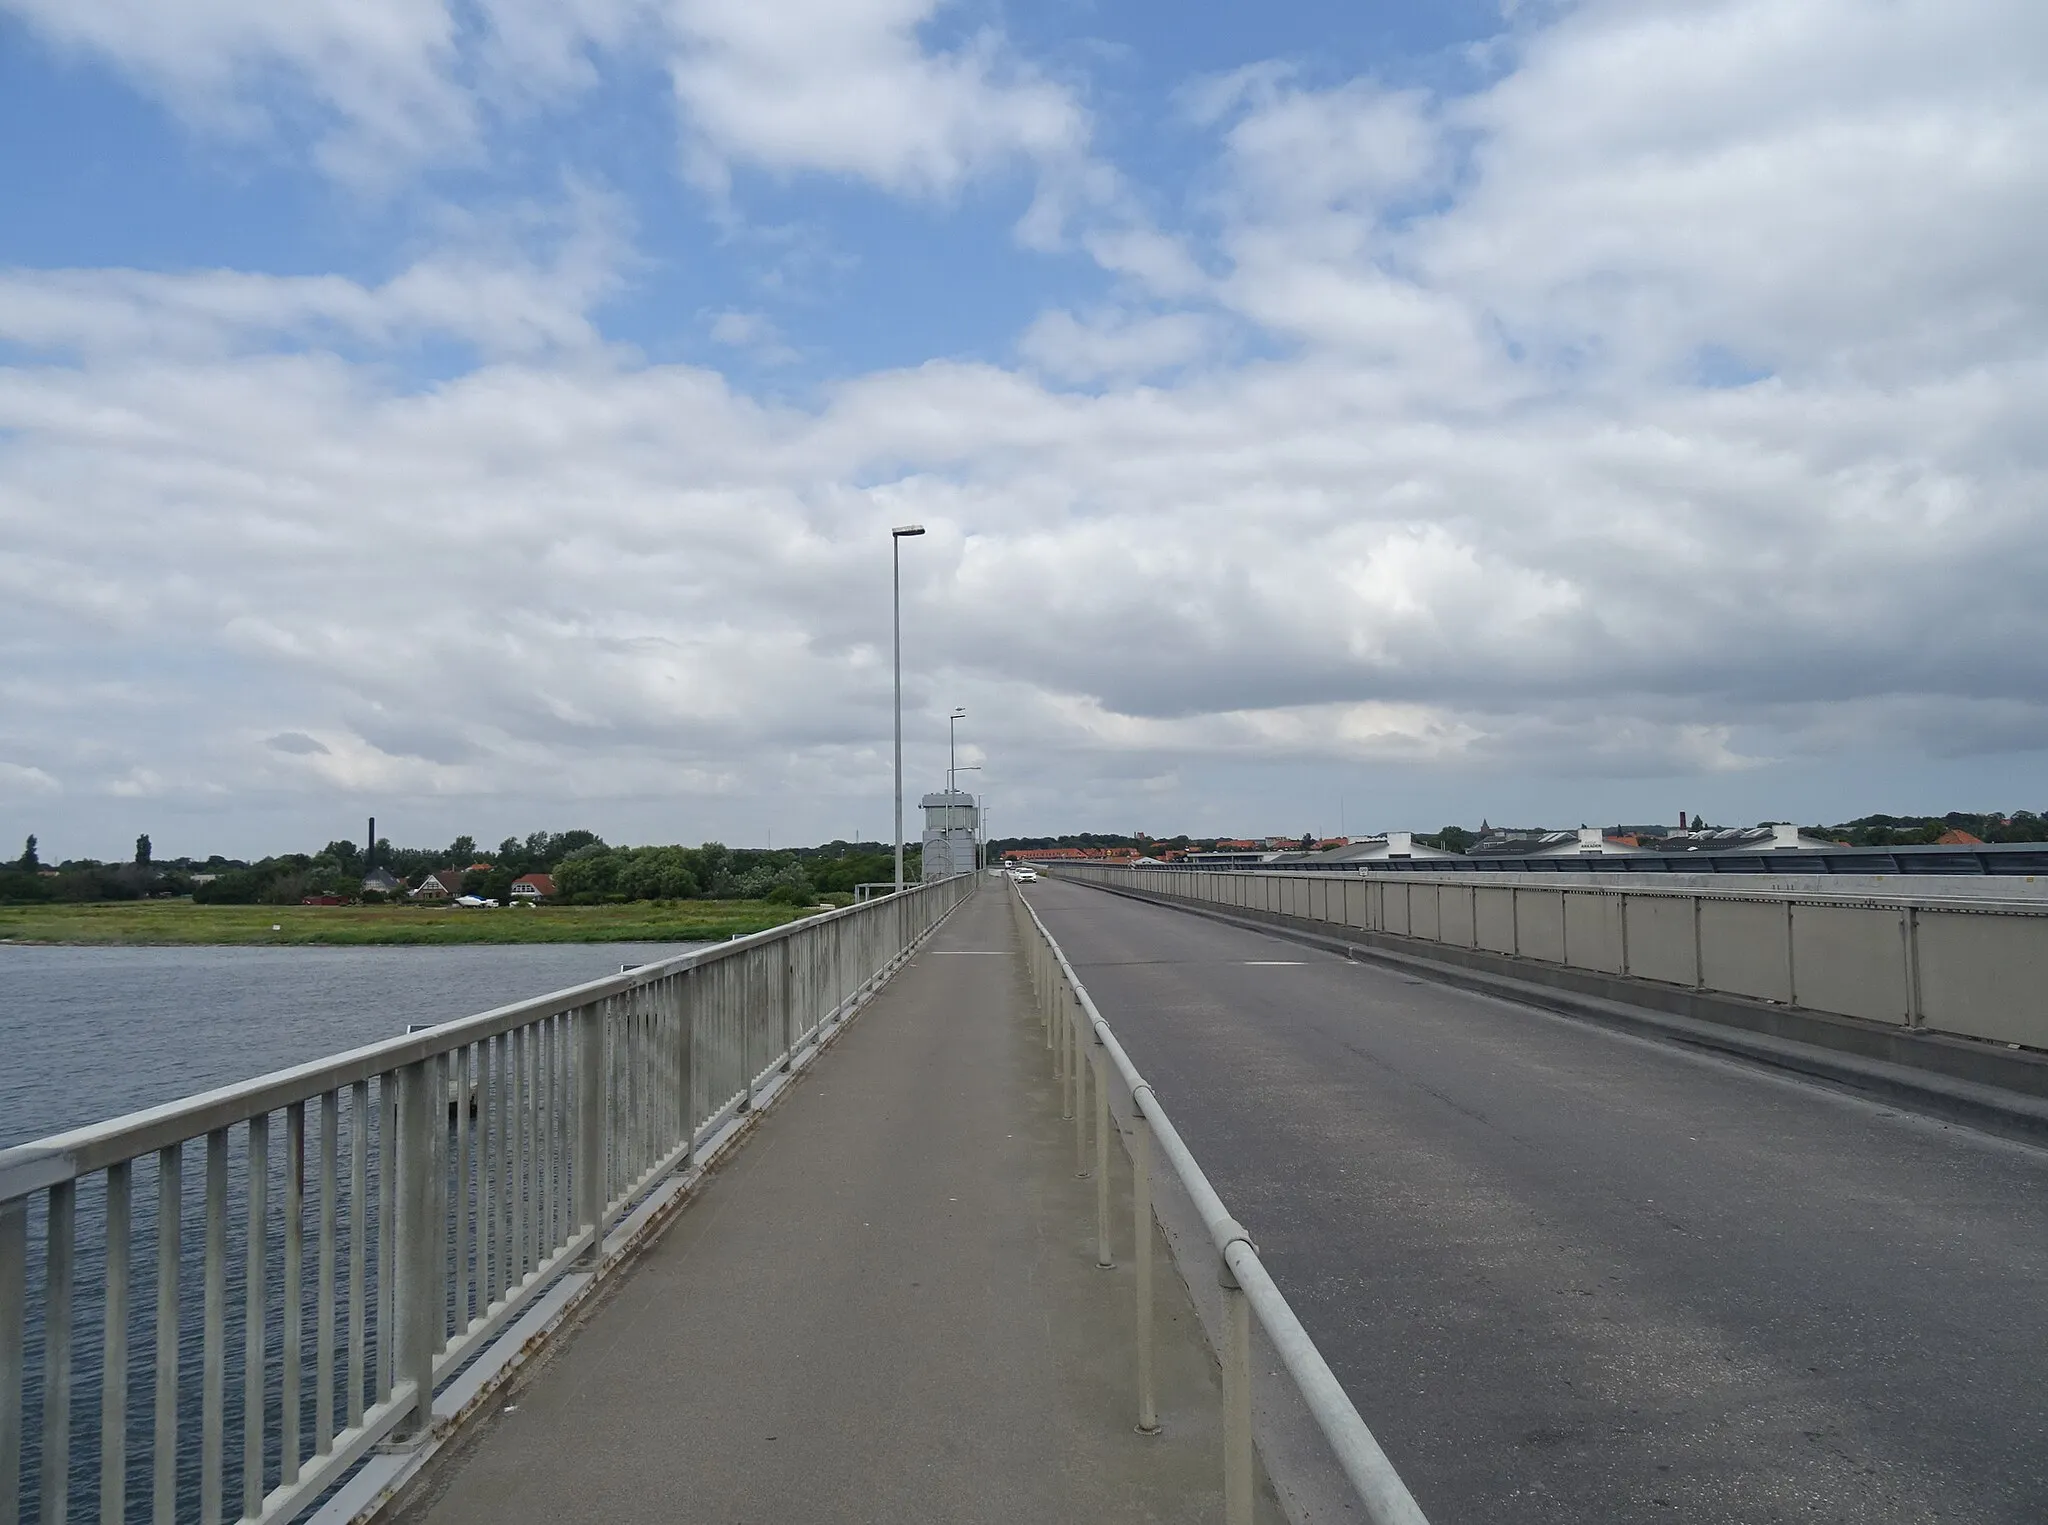 Photo showing: The Masnedsund Bridge between Masnedø and Sjælland in Denmark. The combined sidewalk and cycle lane is a part of the national cycling route 7 while the road is a part of the secondary route 153.